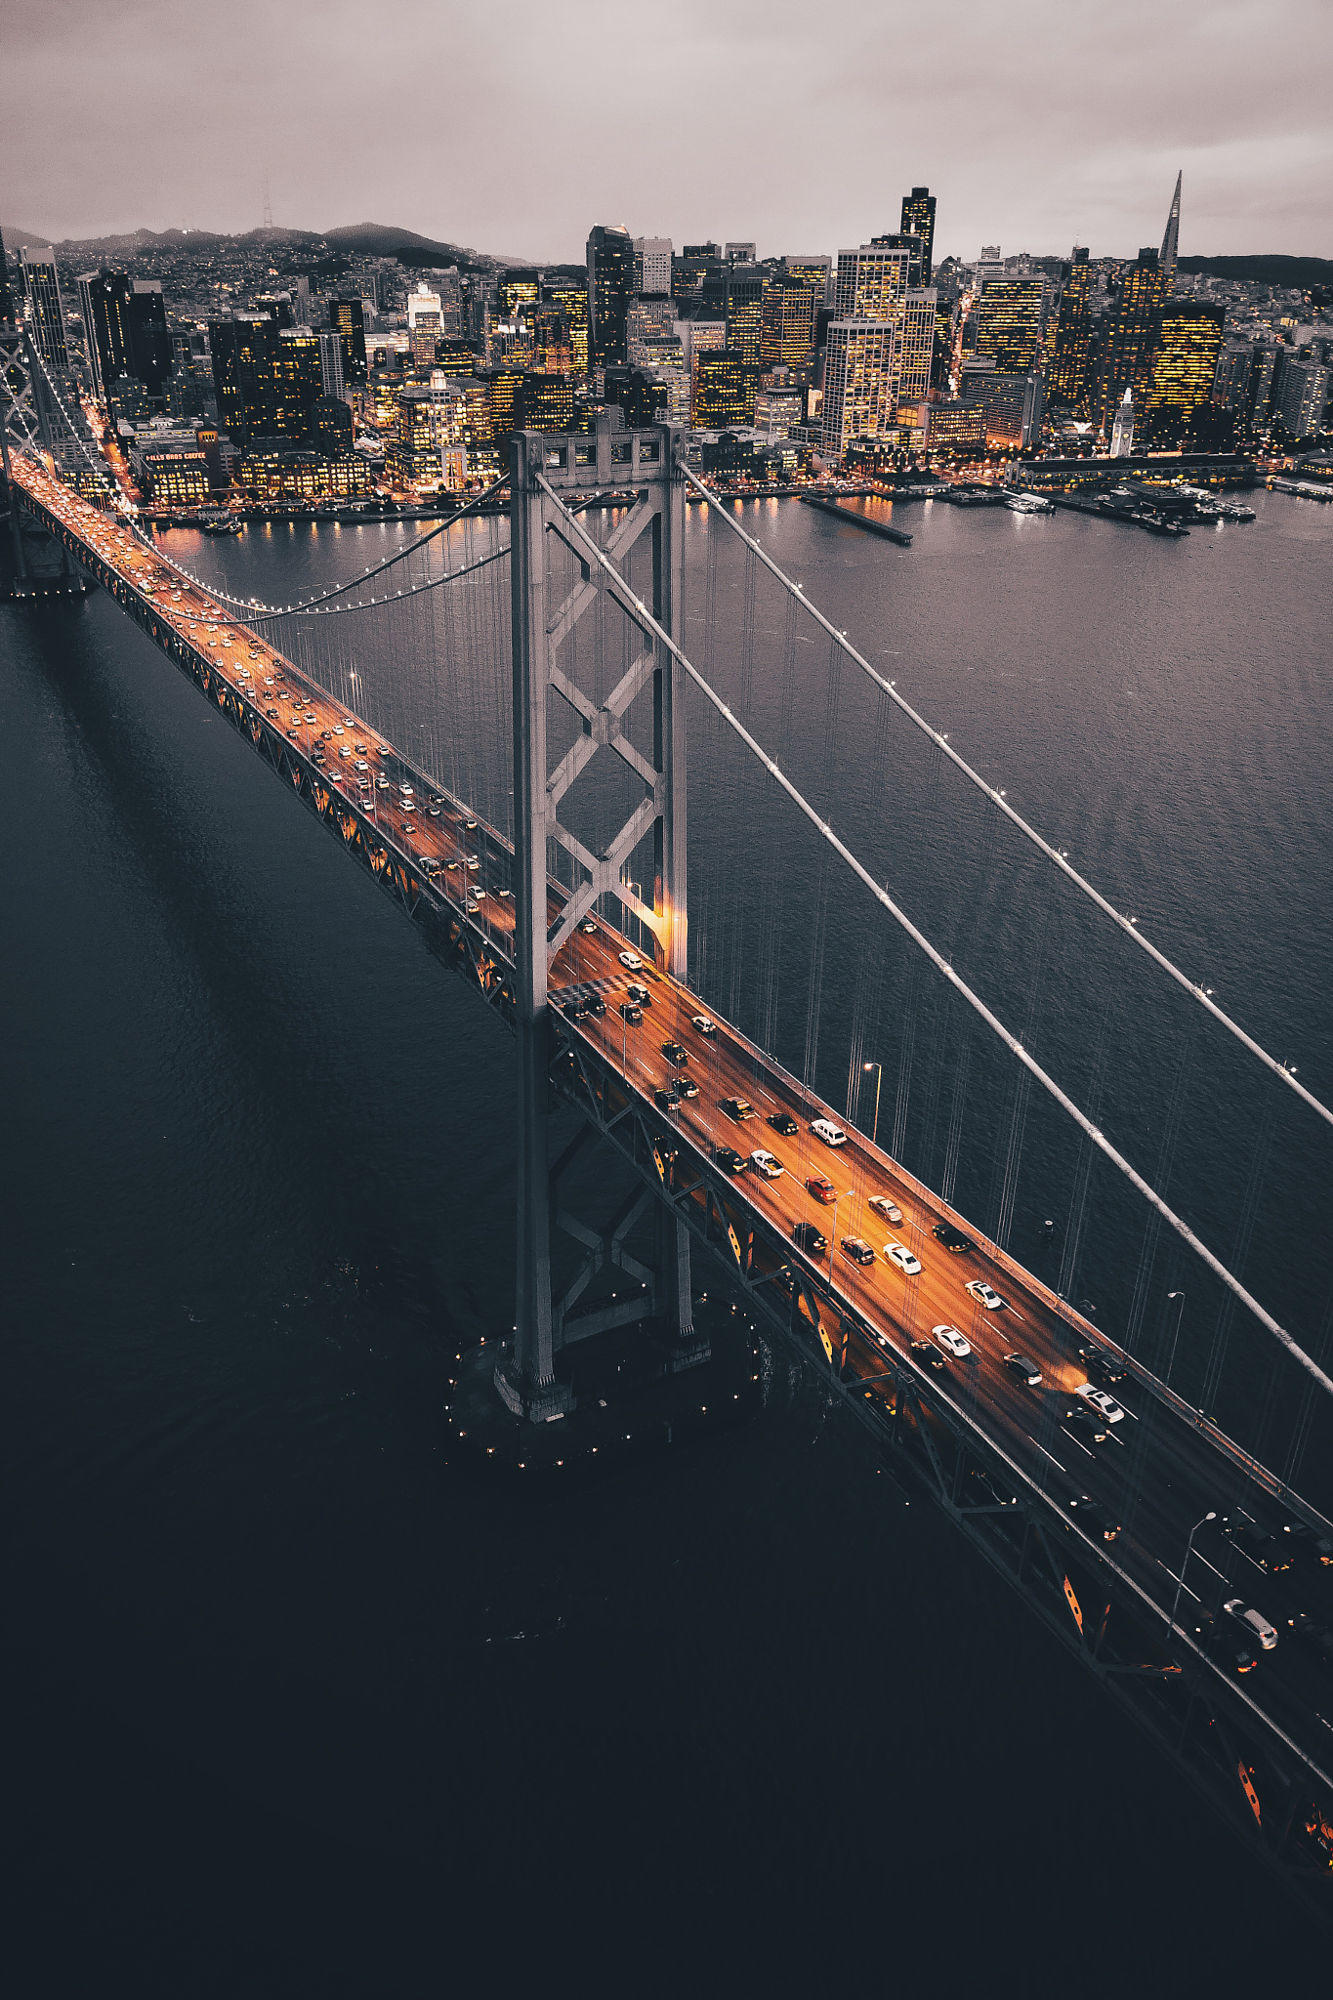 The other SF Bridge